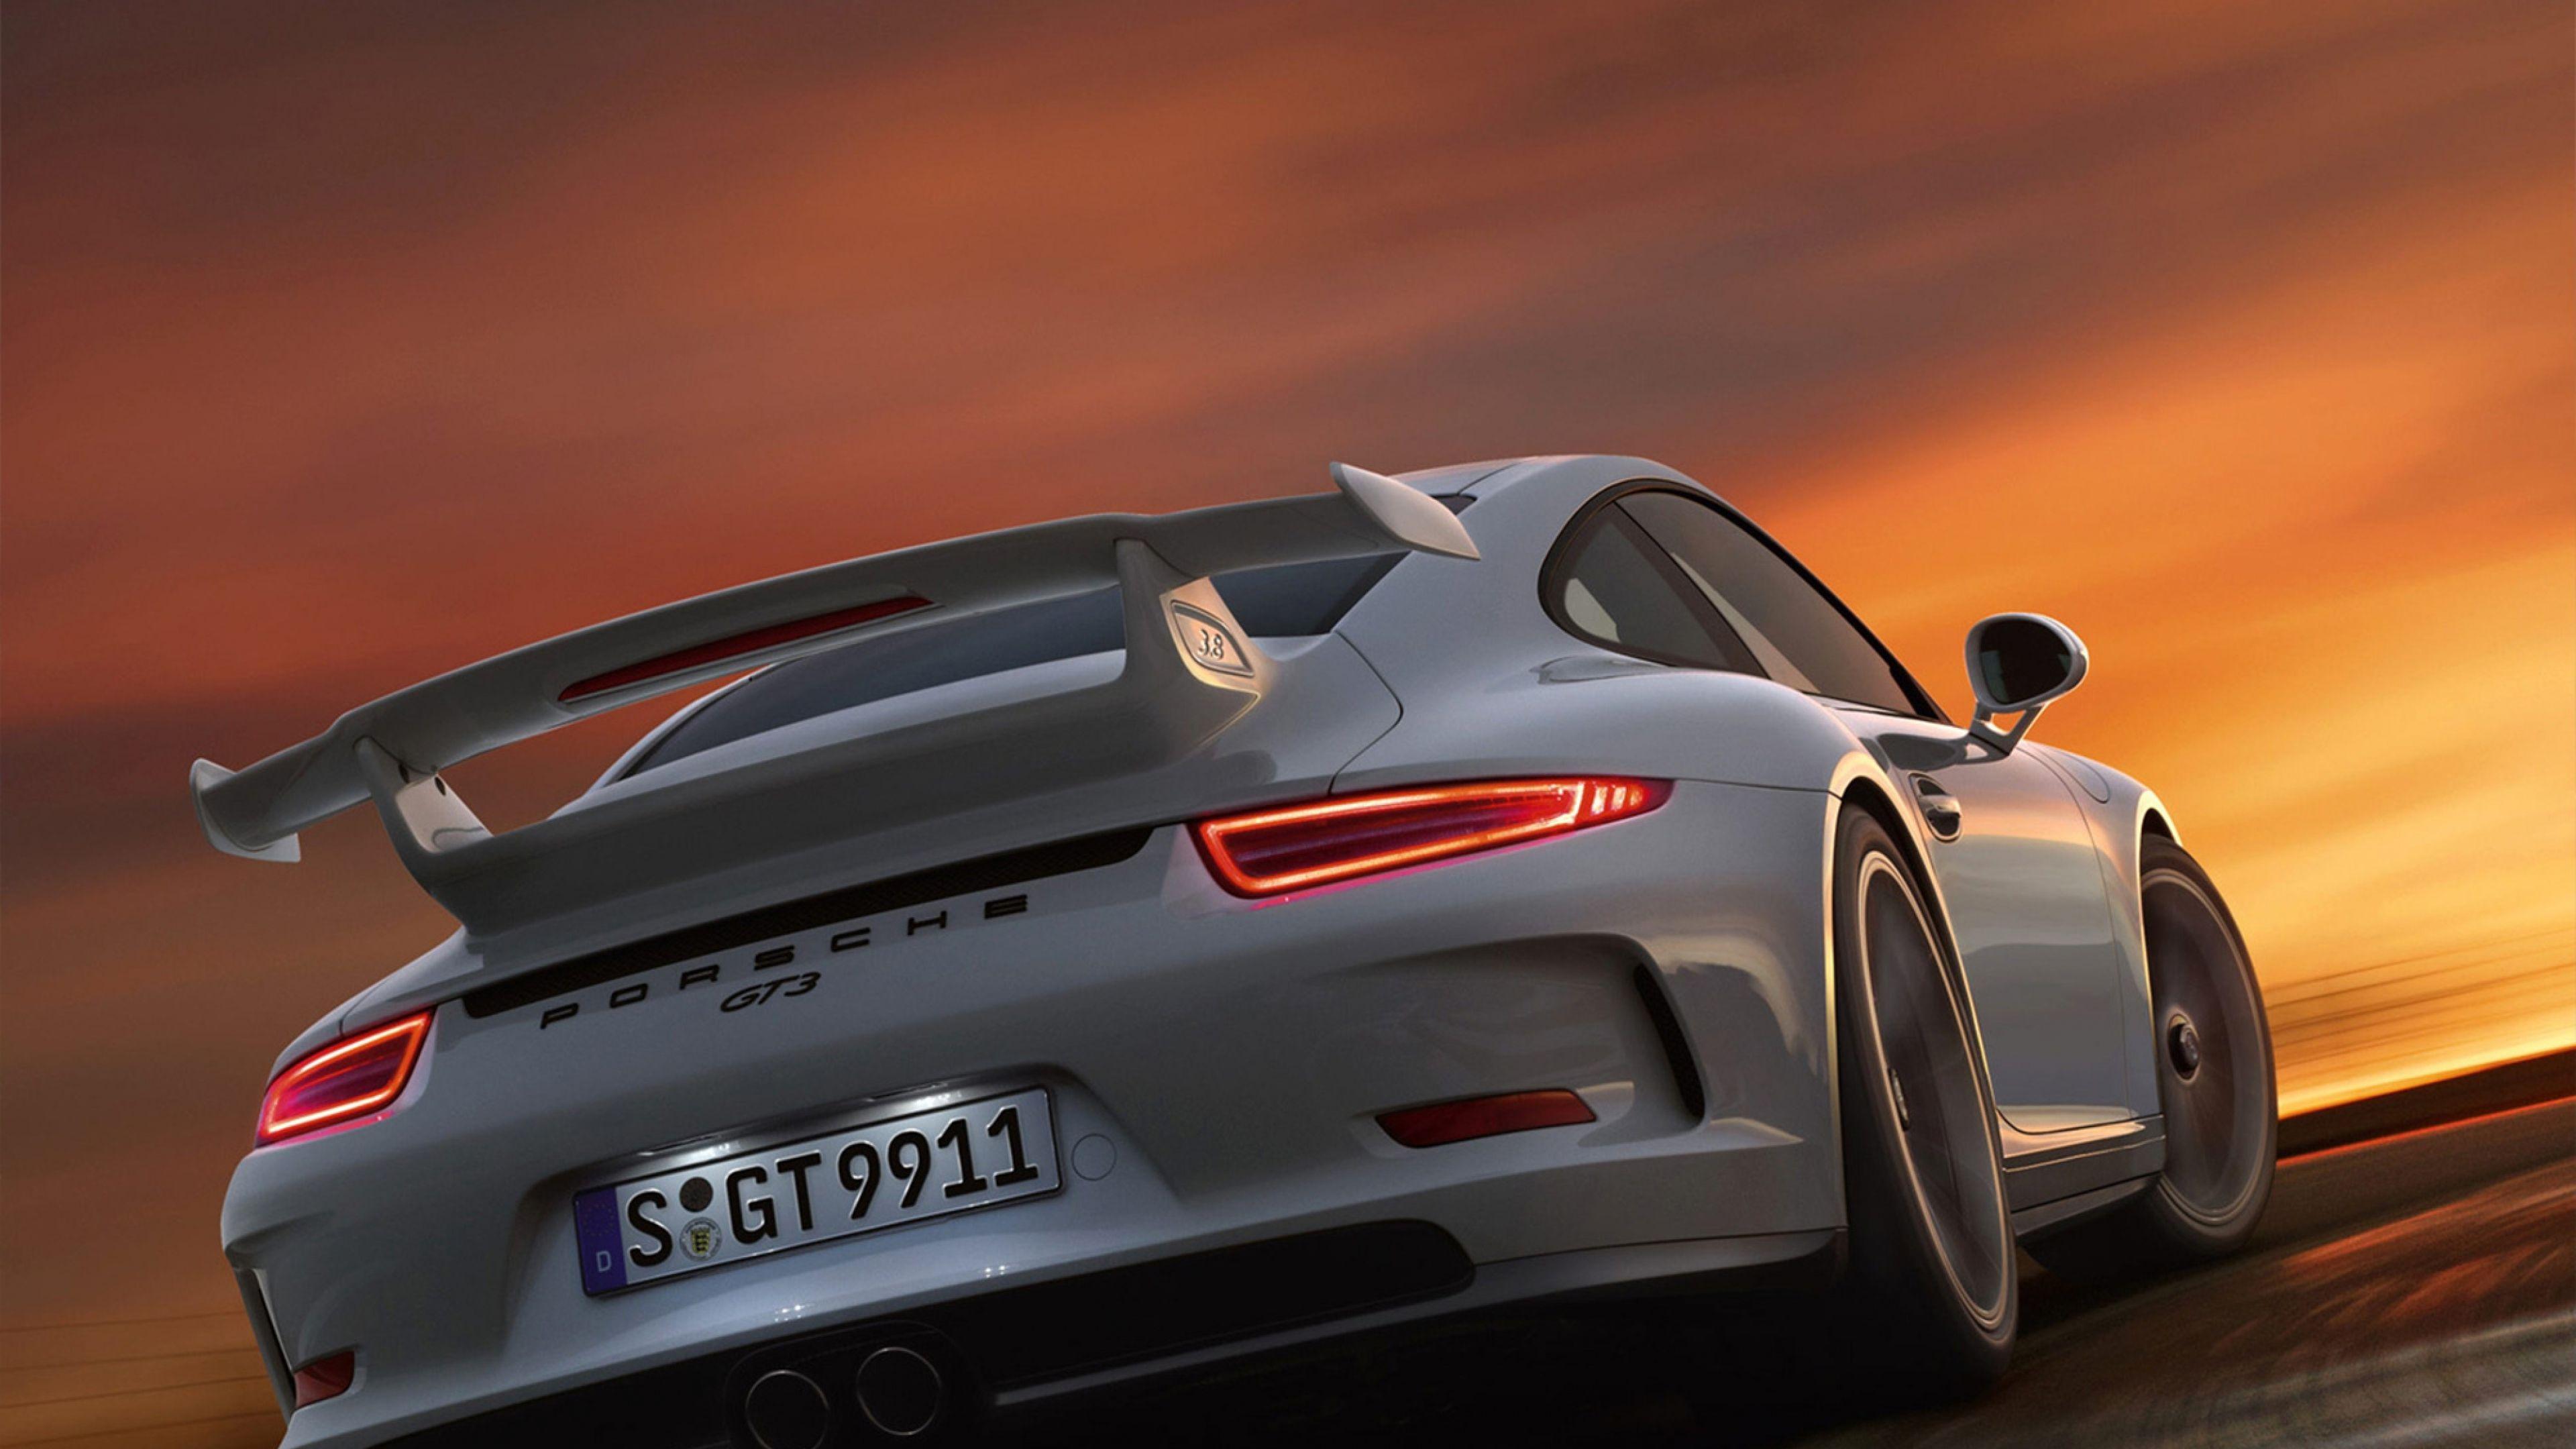 Porsche Sports Car Wallpapers - Rev Up Your Screens with Stunning Car ...